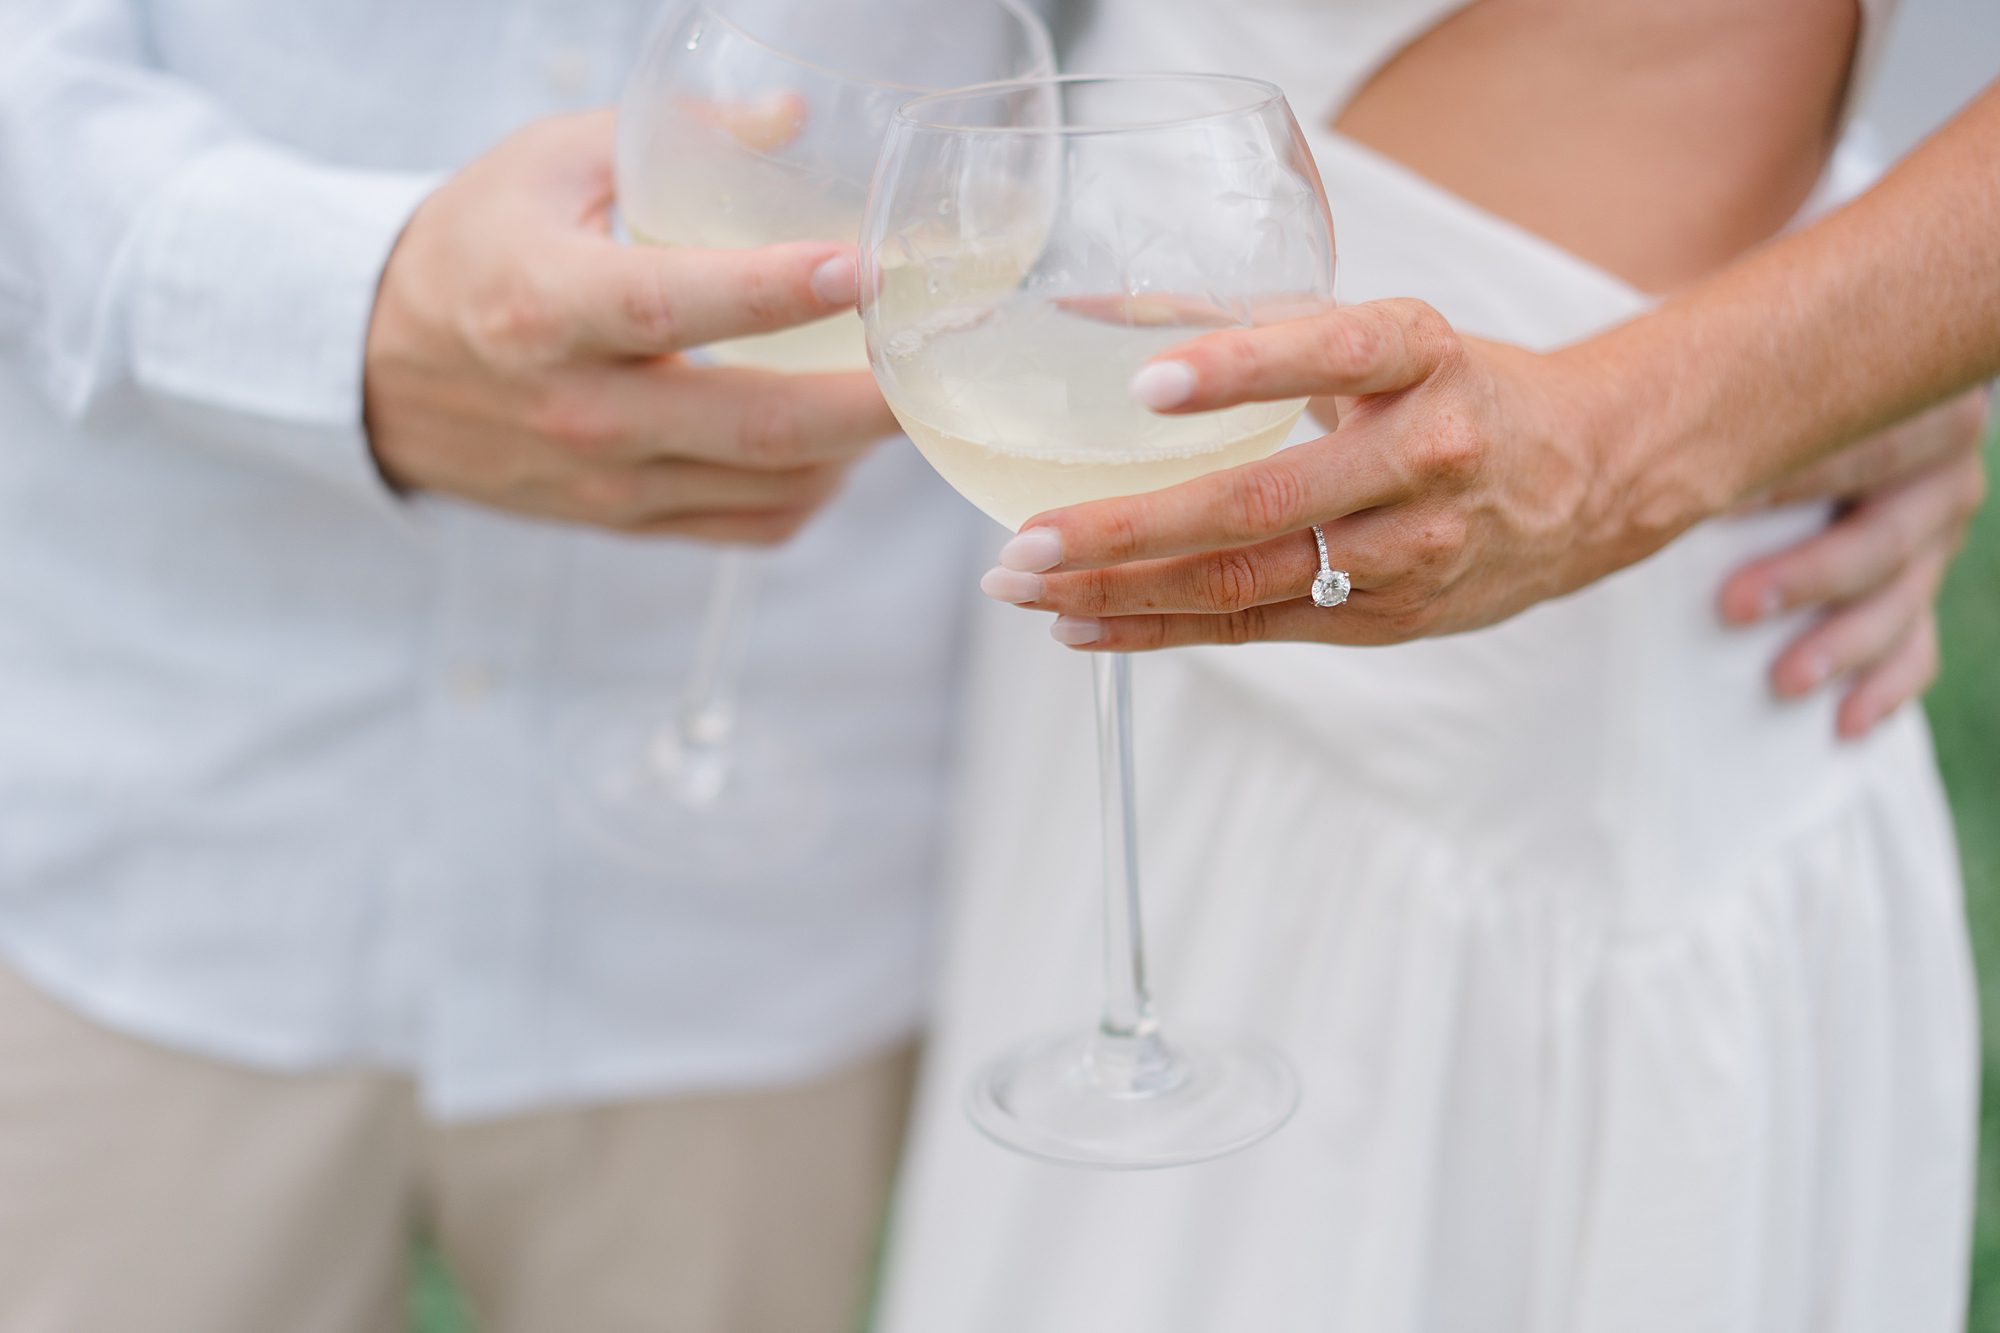 couple celebrate engagement with glass of wine